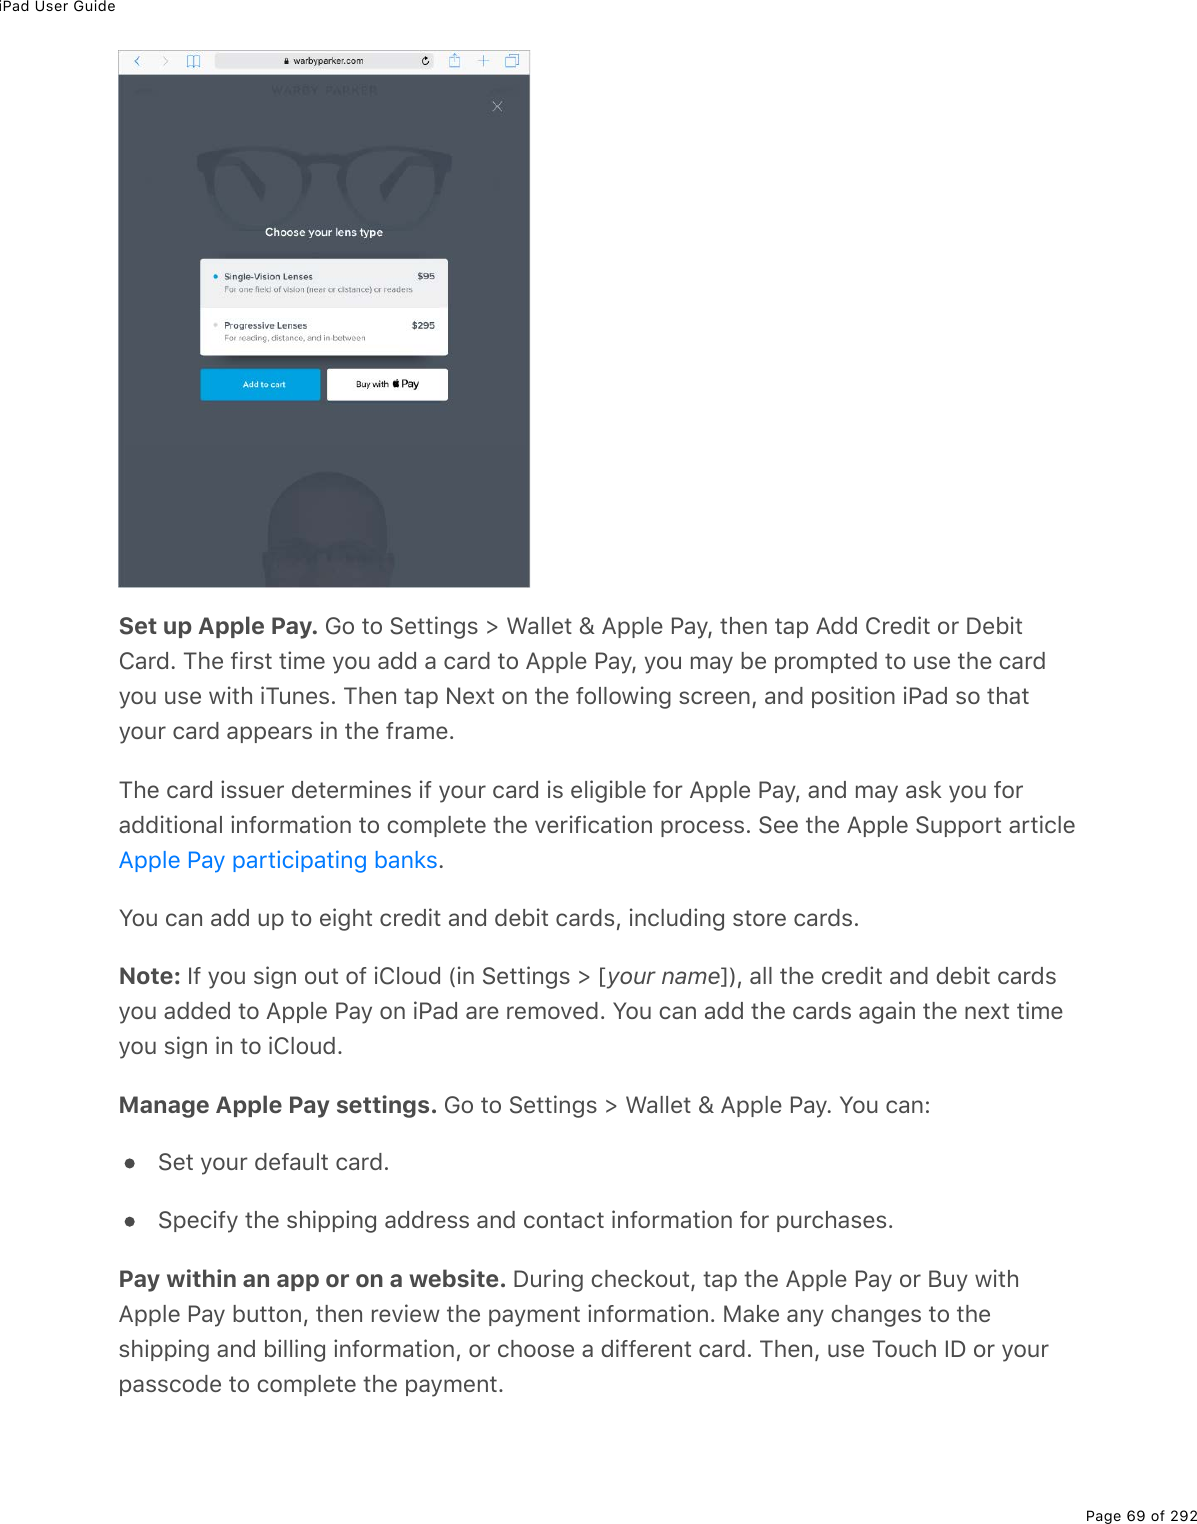 iPad User GuidePage 69 of 292Set up Apple Pay. Go to Settings &gt; Wallet &amp; Apple Pay, then tap Add Credit or DebitCard. The first time you add a card to Apple Pay, you may be prompted to use the cardyou use with iTunes. Then tap Next on the following screen, and position iPad so thatyour card appears in the frame.The card issuer determines if your card is eligible for Apple Pay, and may ask you foradditional information to complete the verification process. See the Apple Support article.You can add up to eight credit and debit cards, including store cards.Note: If you sign out of iCloud (in Settings &gt; [your name]), all the credit and debit cardsyou added to Apple Pay on iPad are removed. You can add the cards again the next timeyou sign in to iCloud.Manage Apple Pay settings. Go to Settings &gt; Wallet &amp; Apple Pay. You can:Set your default card.Specify the shipping address and contact information for purchases.Pay within an app or on a website. During checkout, tap the Apple Pay or Buy withApple Pay button, then review the payment information. Make any changes to theshipping and billing information, or choose a different card. Then, use Touch ID or yourpasscode to complete the payment.Apple Pay participating banks